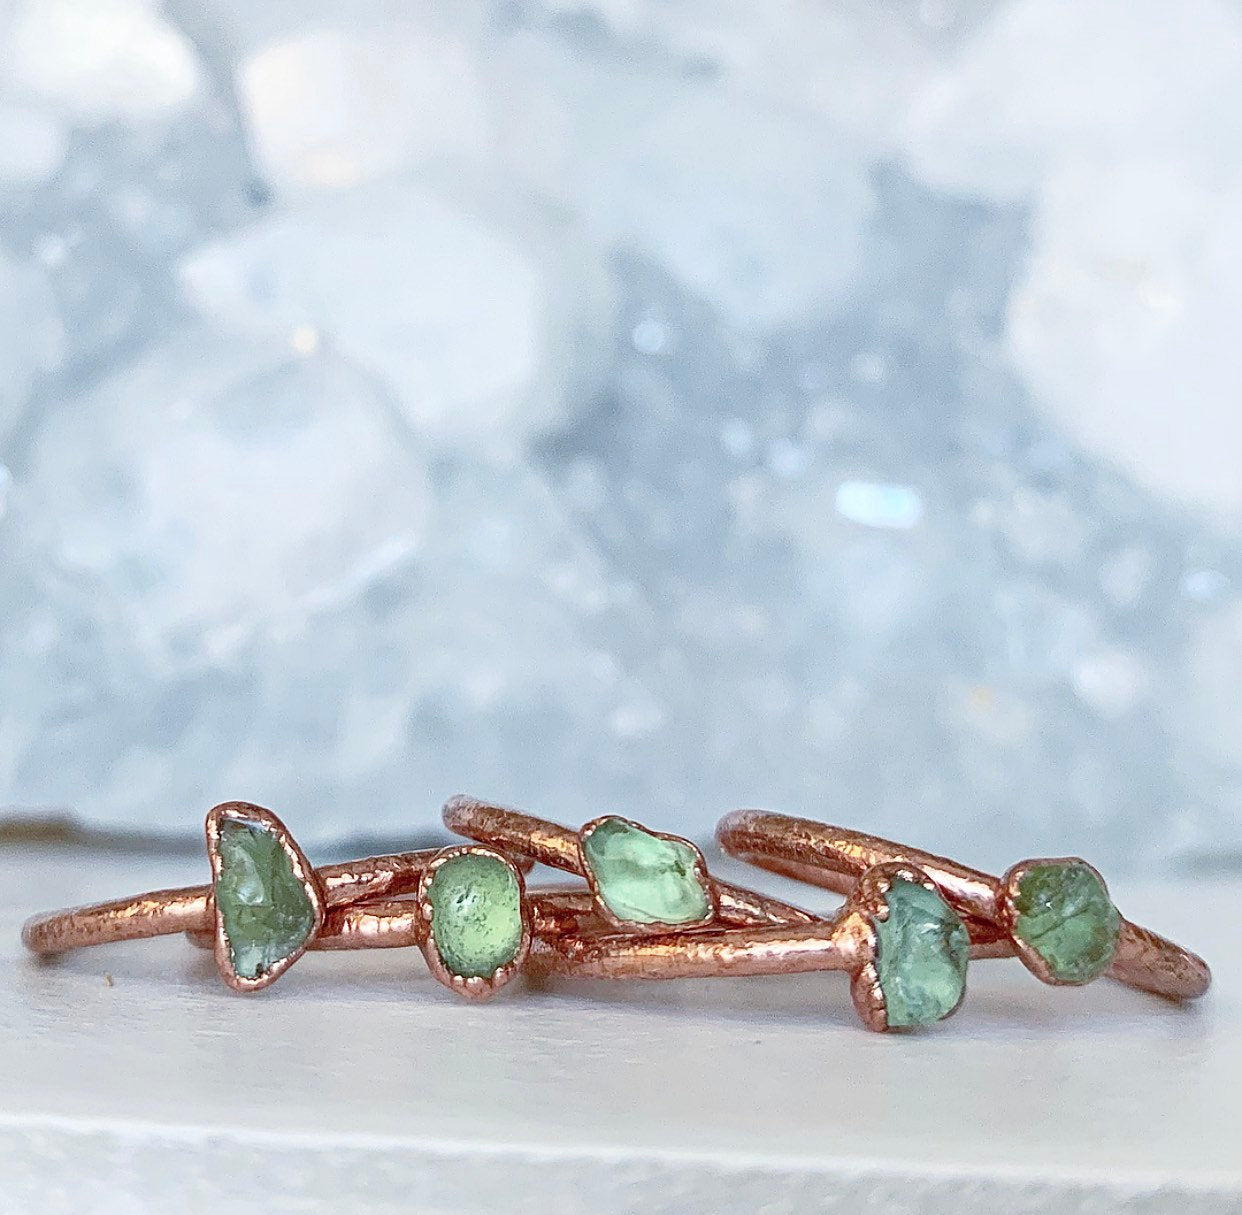 Tiny Raw Peridot Ring, August Birthstone Stacking Ring, Dainty Peridot Copper Ring, Delicate Peridot Jewelry, Tiny Copper Stacking Ring